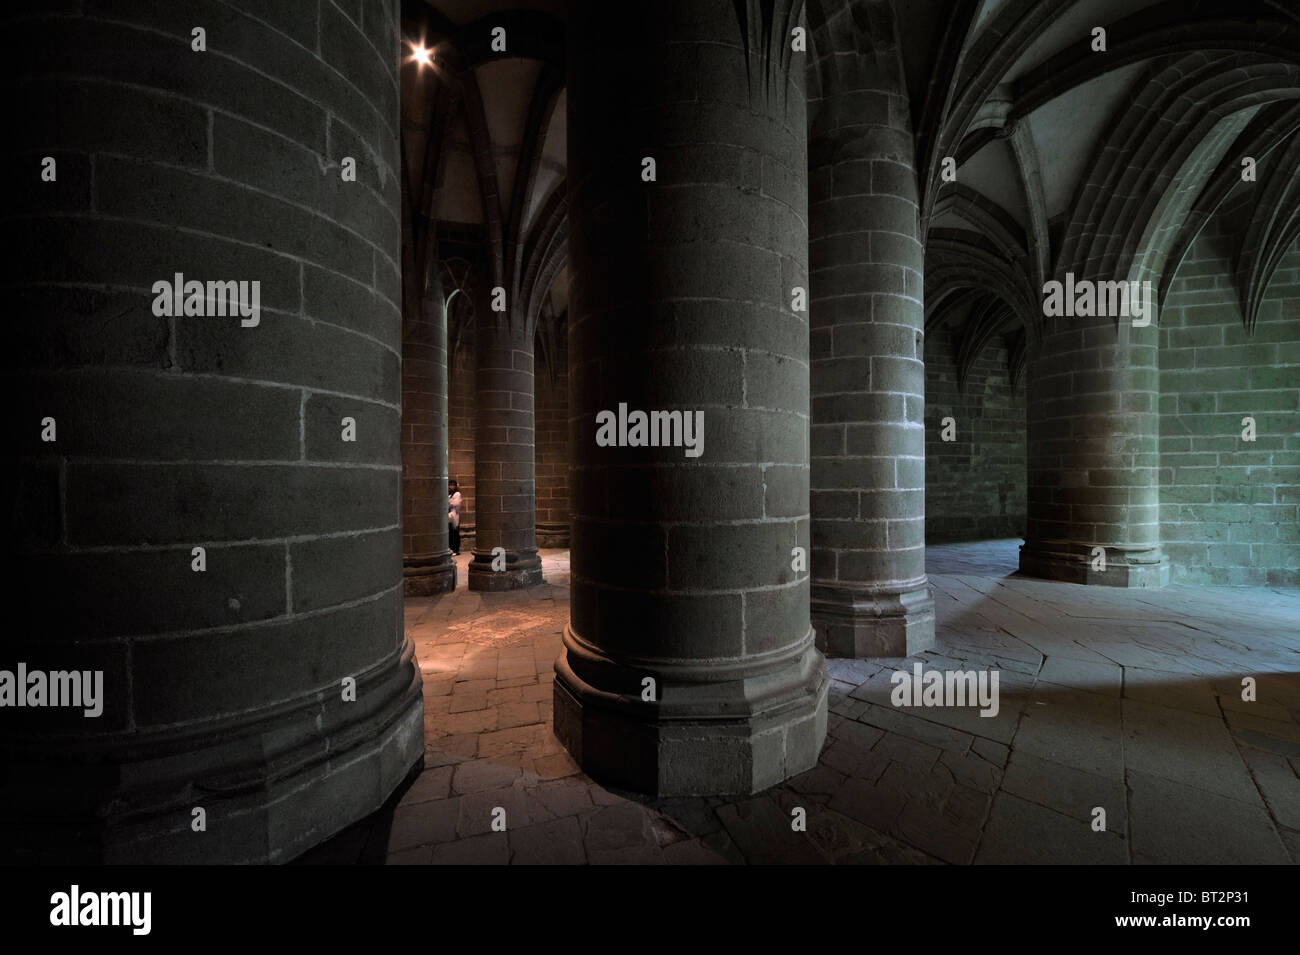 Crypte des Gros Piliers / Crypt of the massive pillars at the Mont Saint-Michel / Saint Michael's Mount abbey, Normandy, France Stock Photo